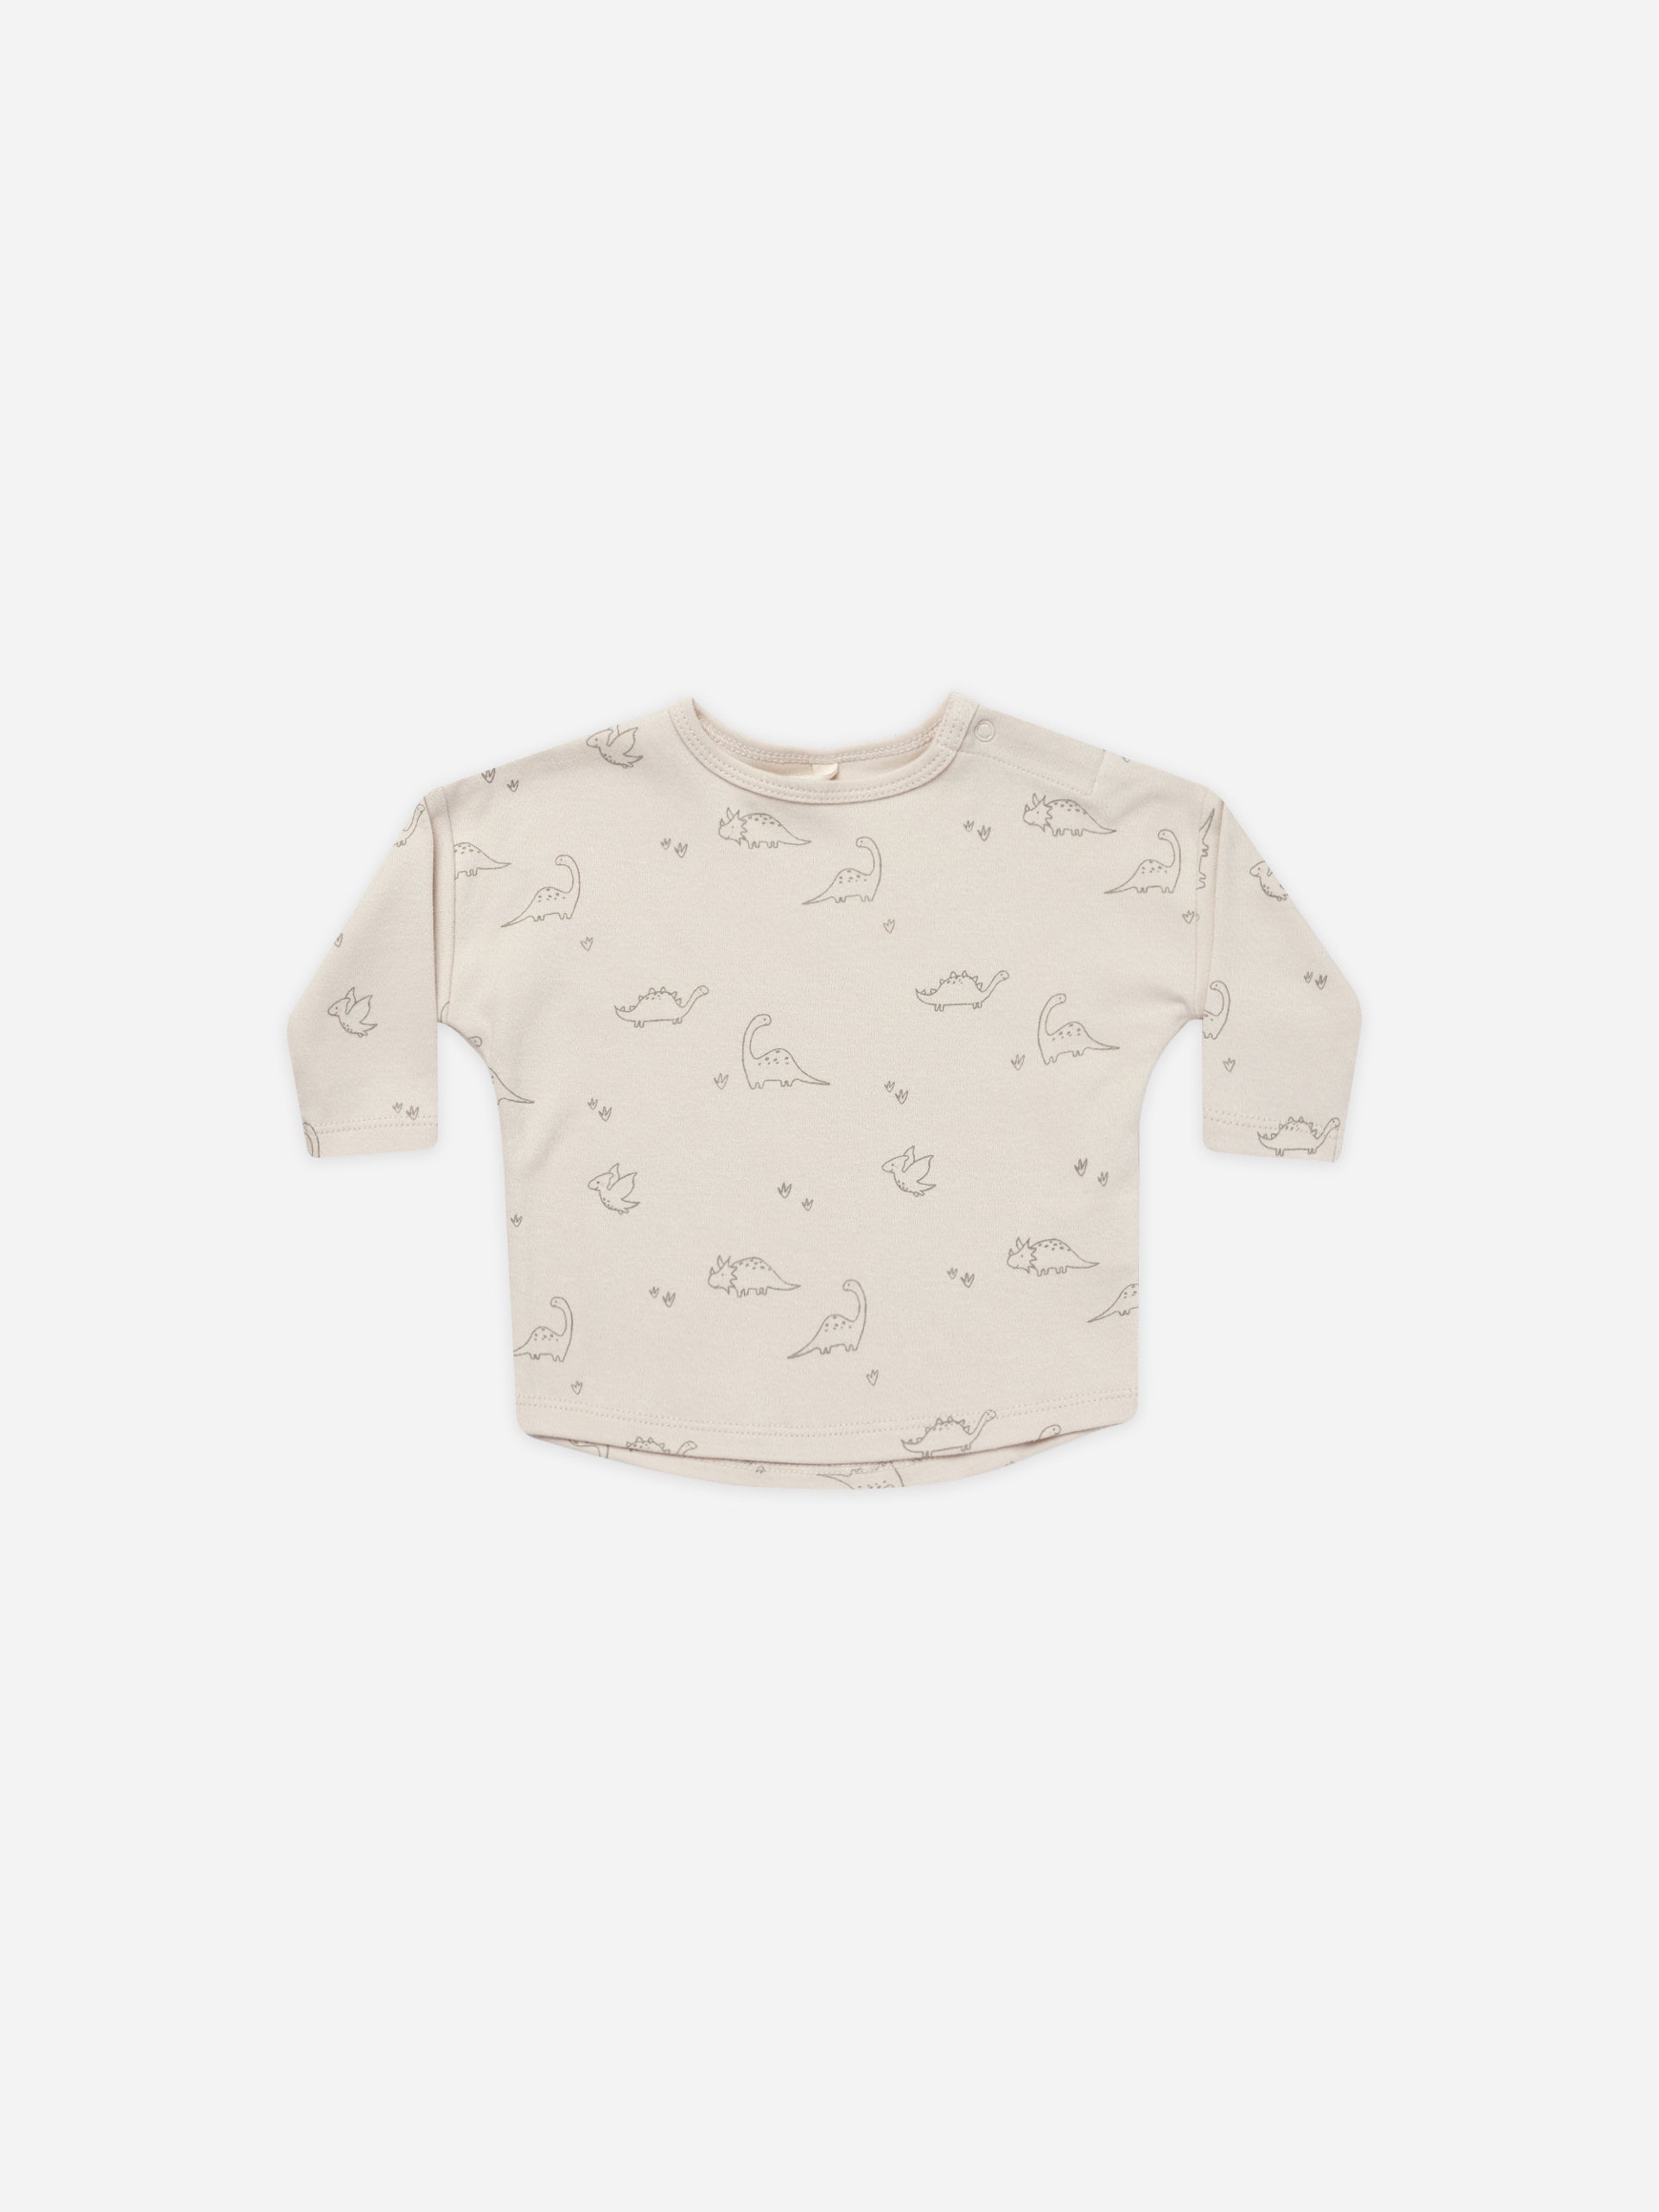 Long Sleeve Tee || Dino - Rylee + Cru | Kids Clothes | Trendy Baby Clothes | Modern Infant Outfits |